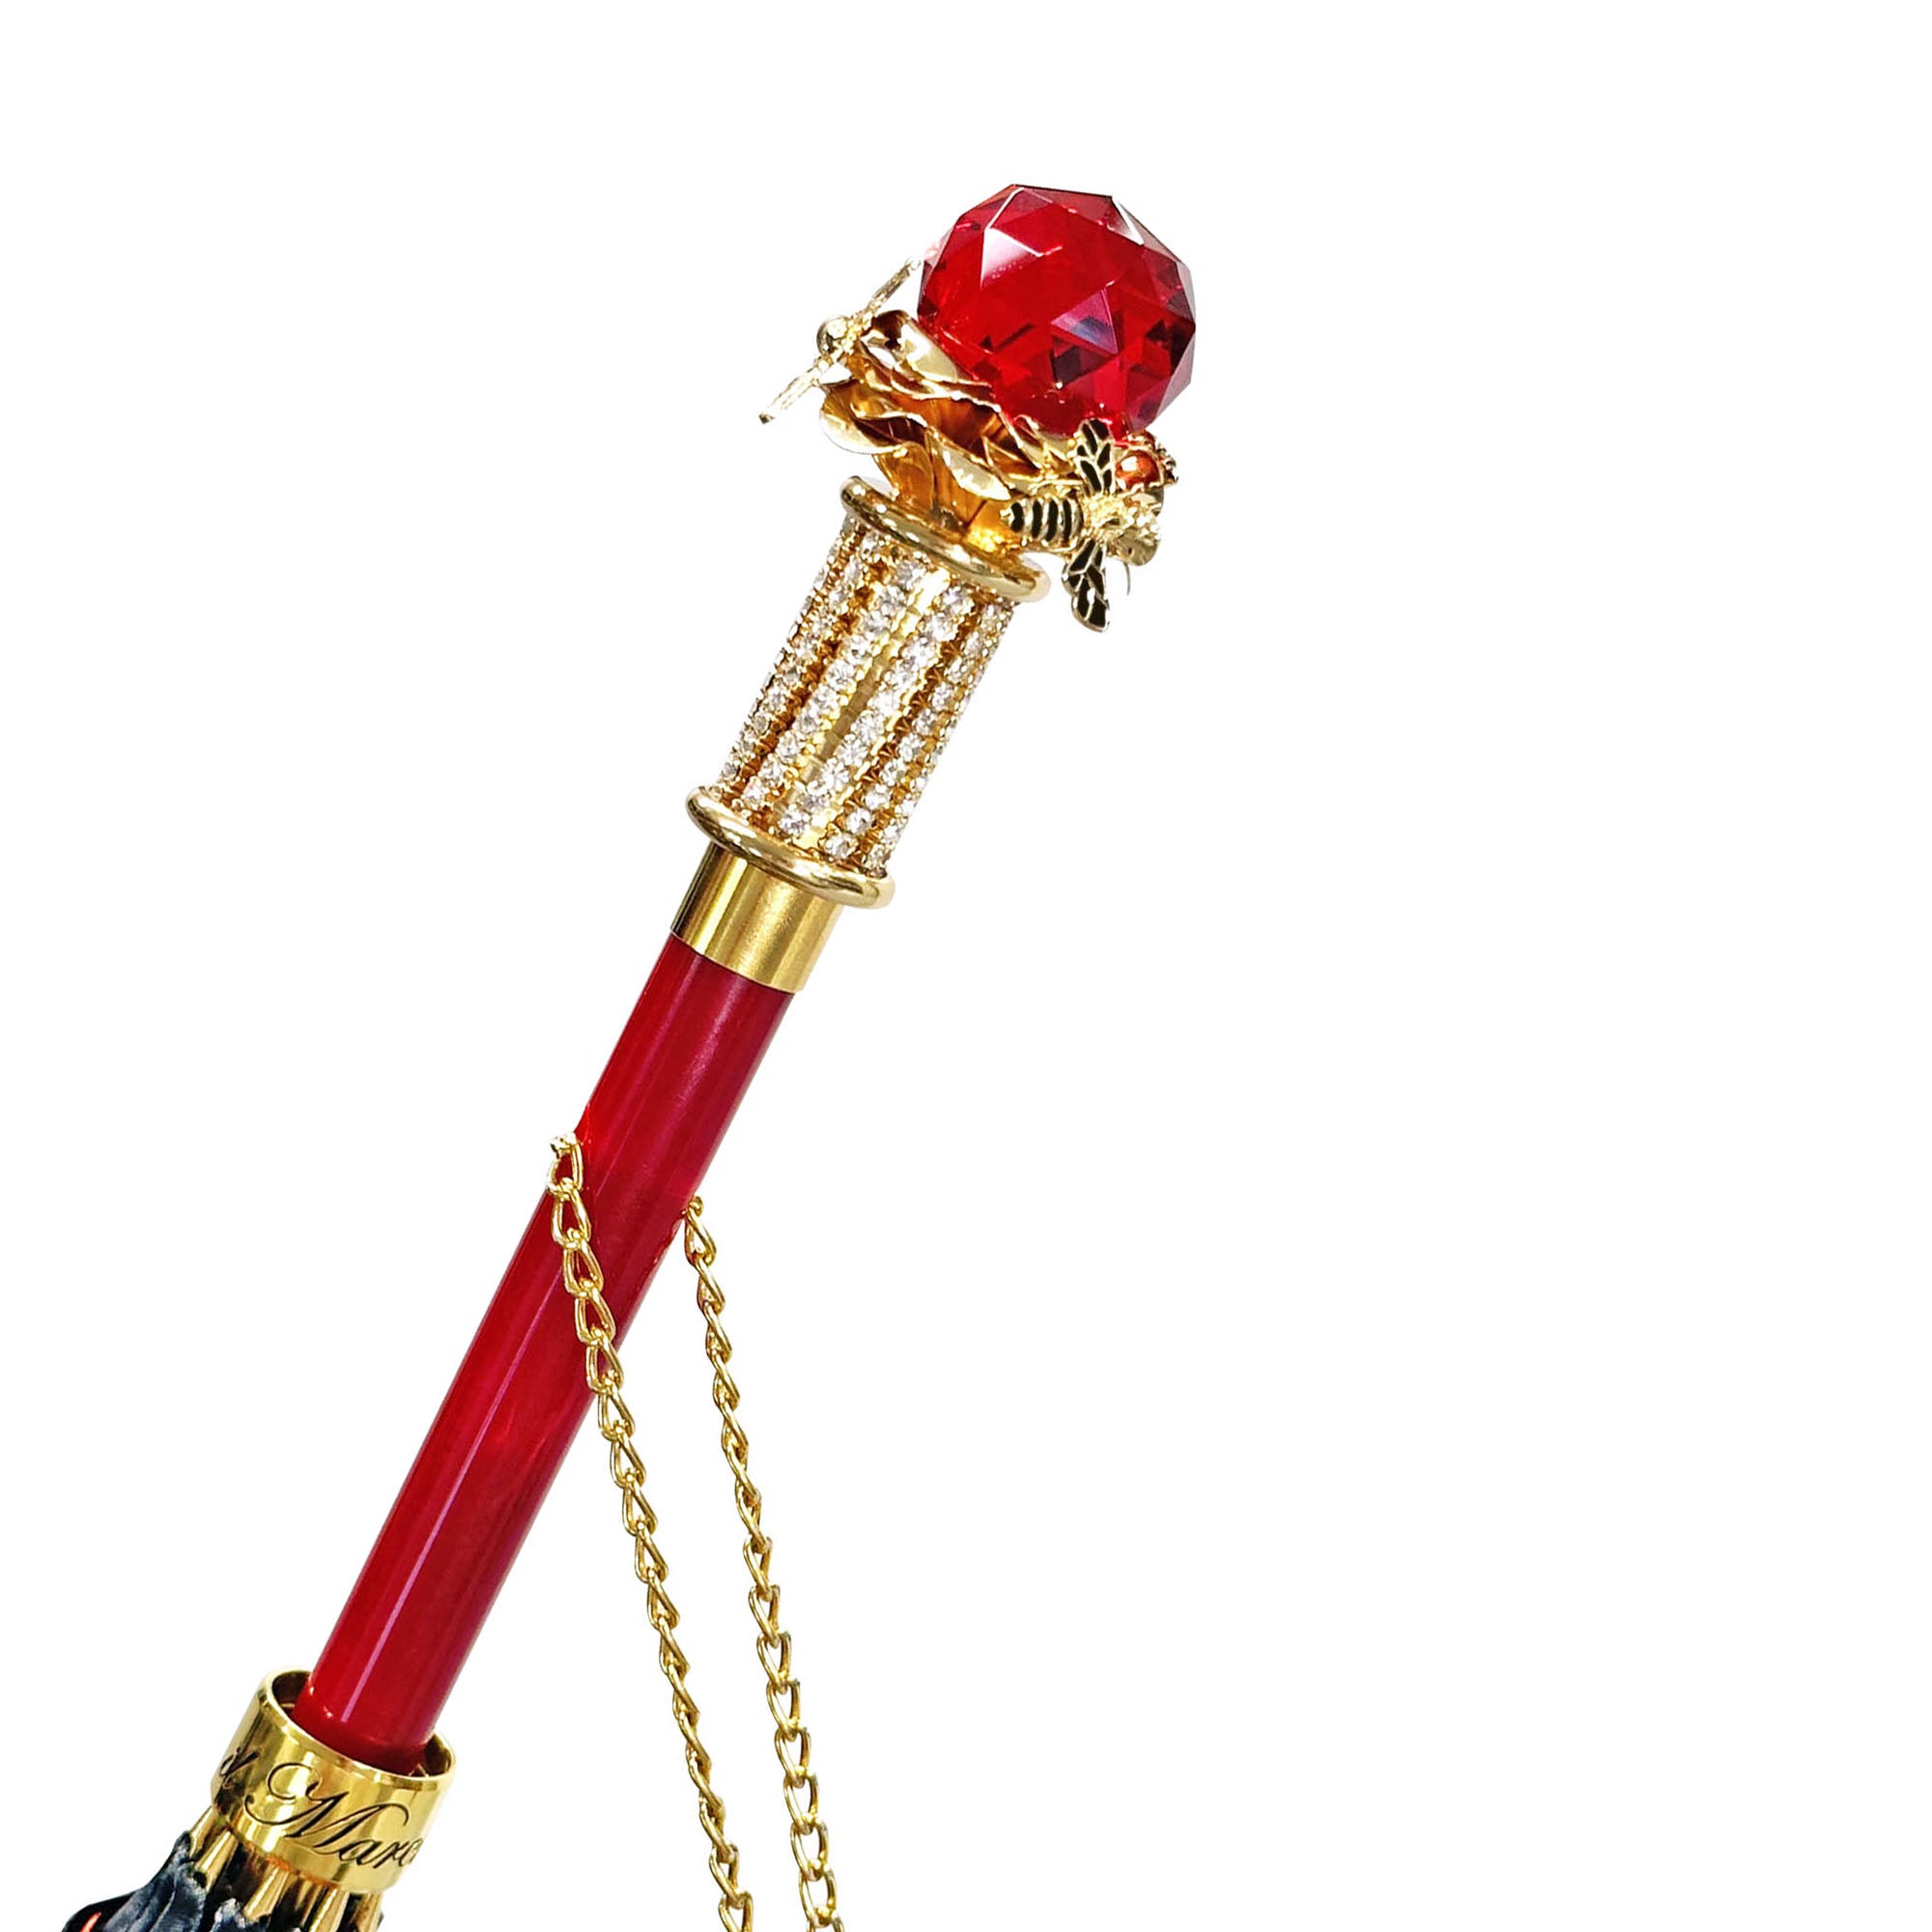 Luxurious Red Umbrella with big red crystals and bee handle